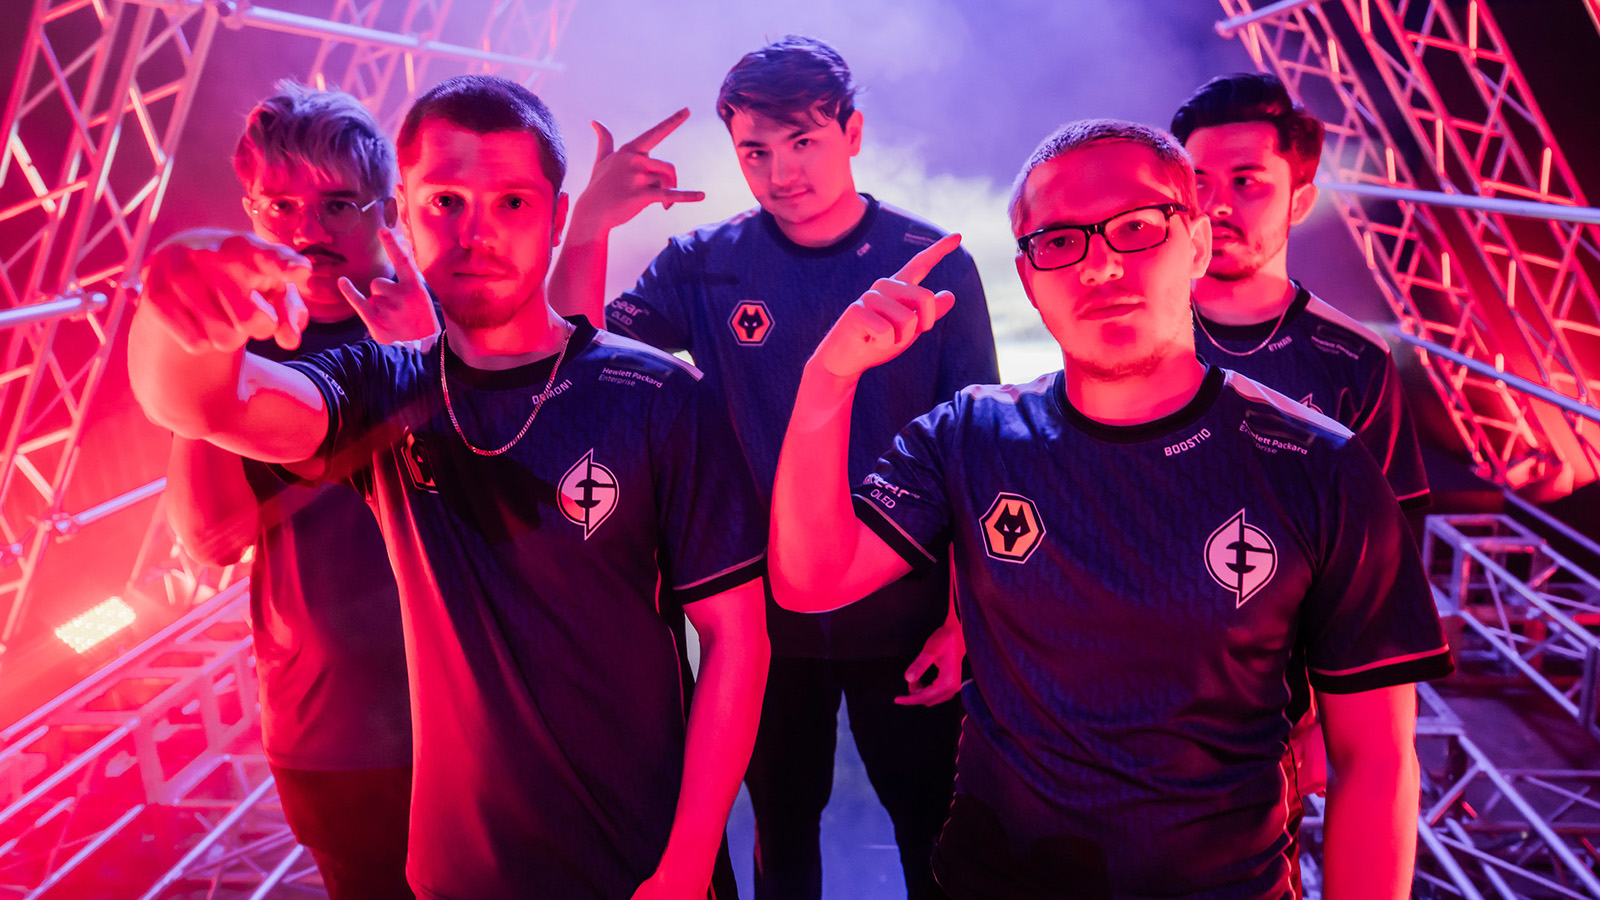 VALORANT Champions Agent pick rate: The Winners and Losers of the Group  Stage, VALORANT Esports News